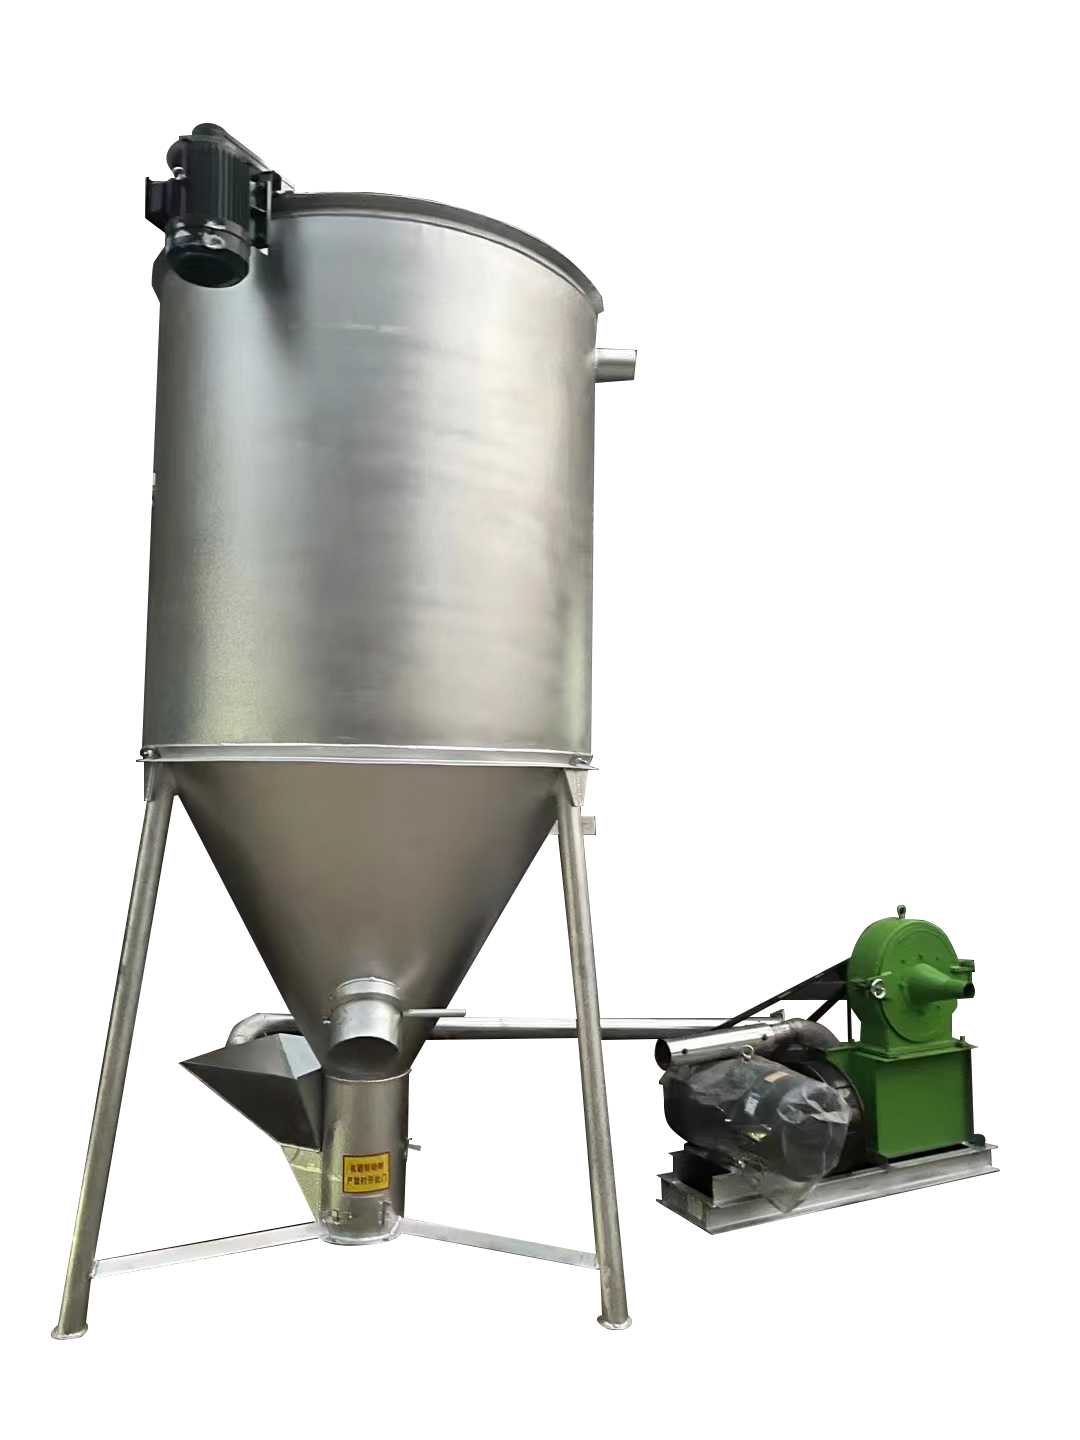 High quality and large capacity concentrate feed tank